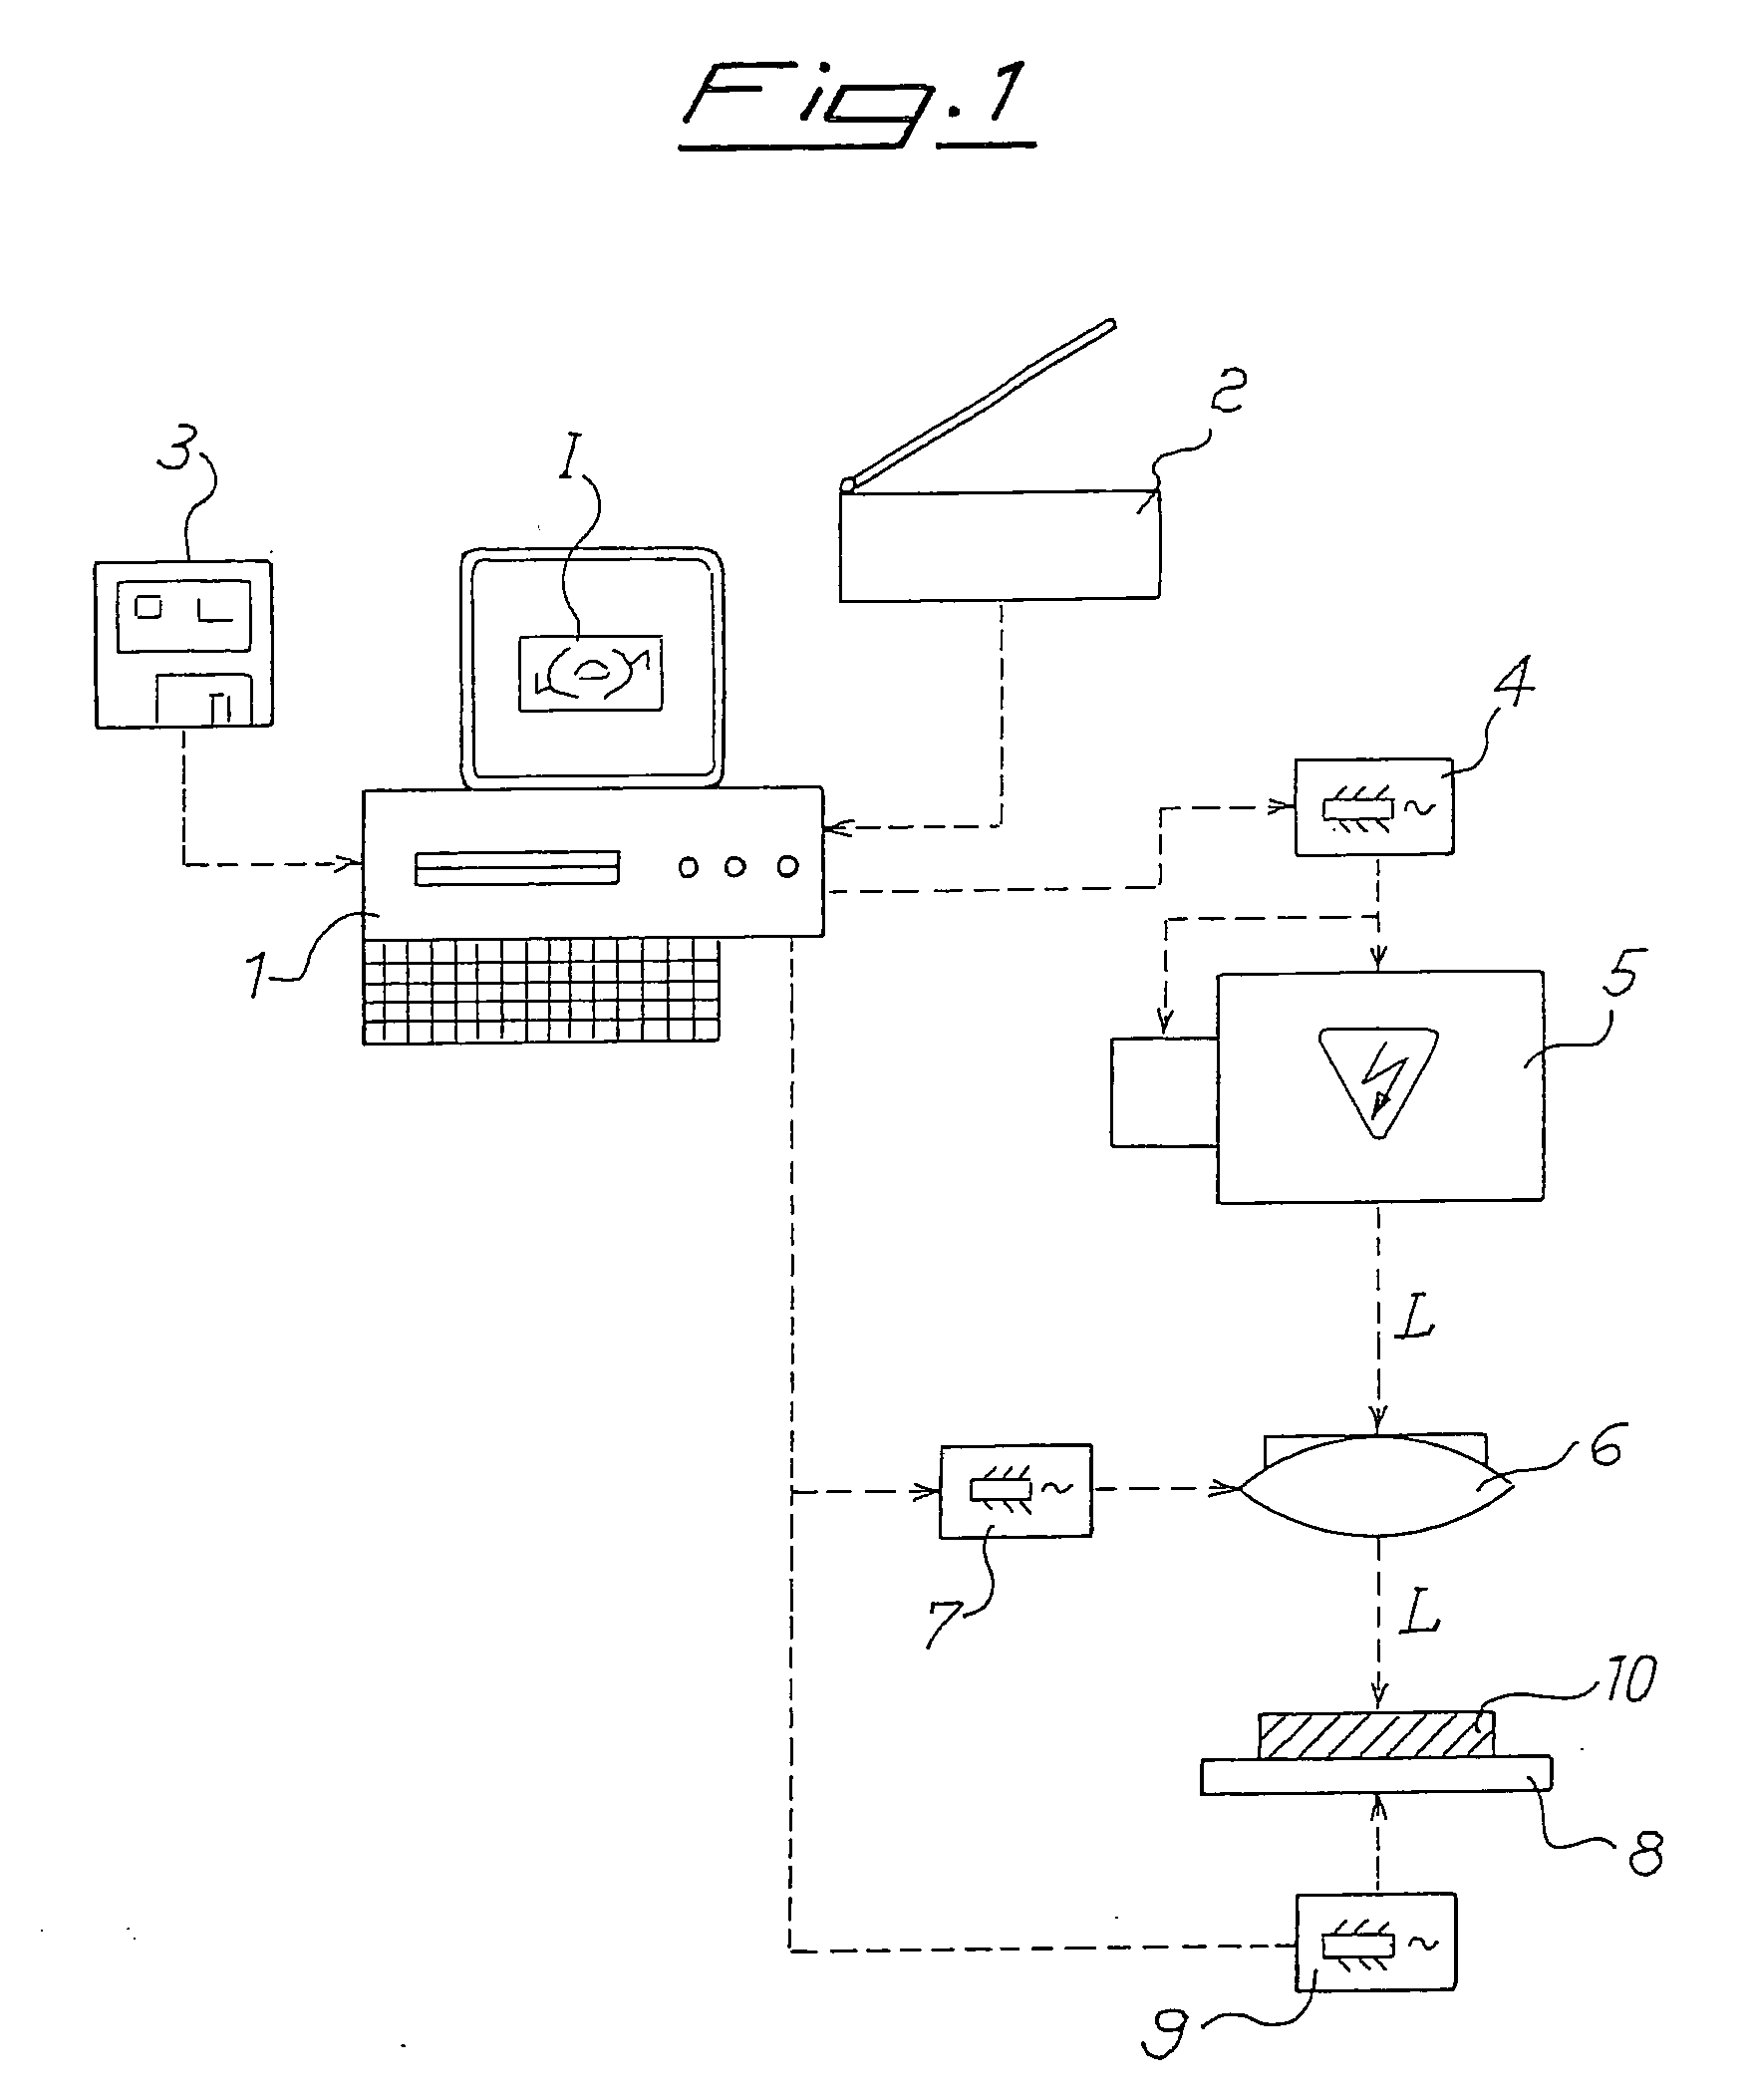 Method and apparatus for transferring images to a wooden support with a laser beam